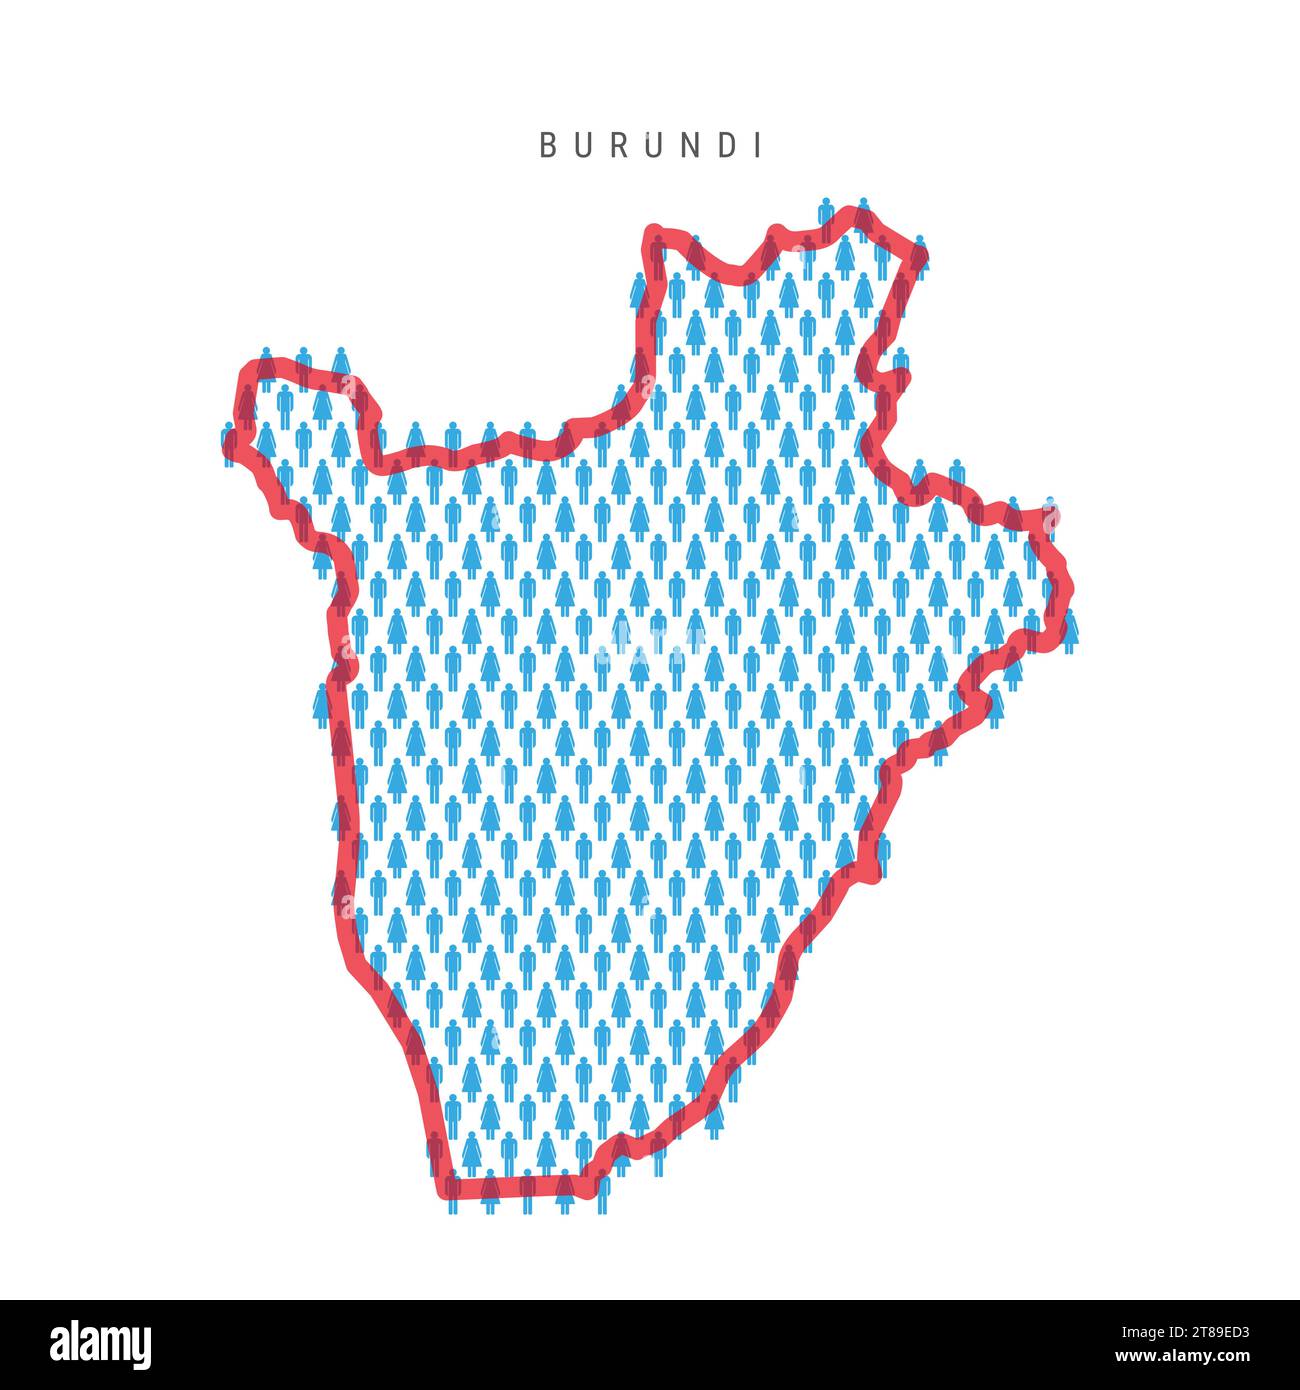 Burundi population map. Stick figures Burundian people map with bold red translucent country border. Pattern of men and women icons. Isolated vector i Stock Vector